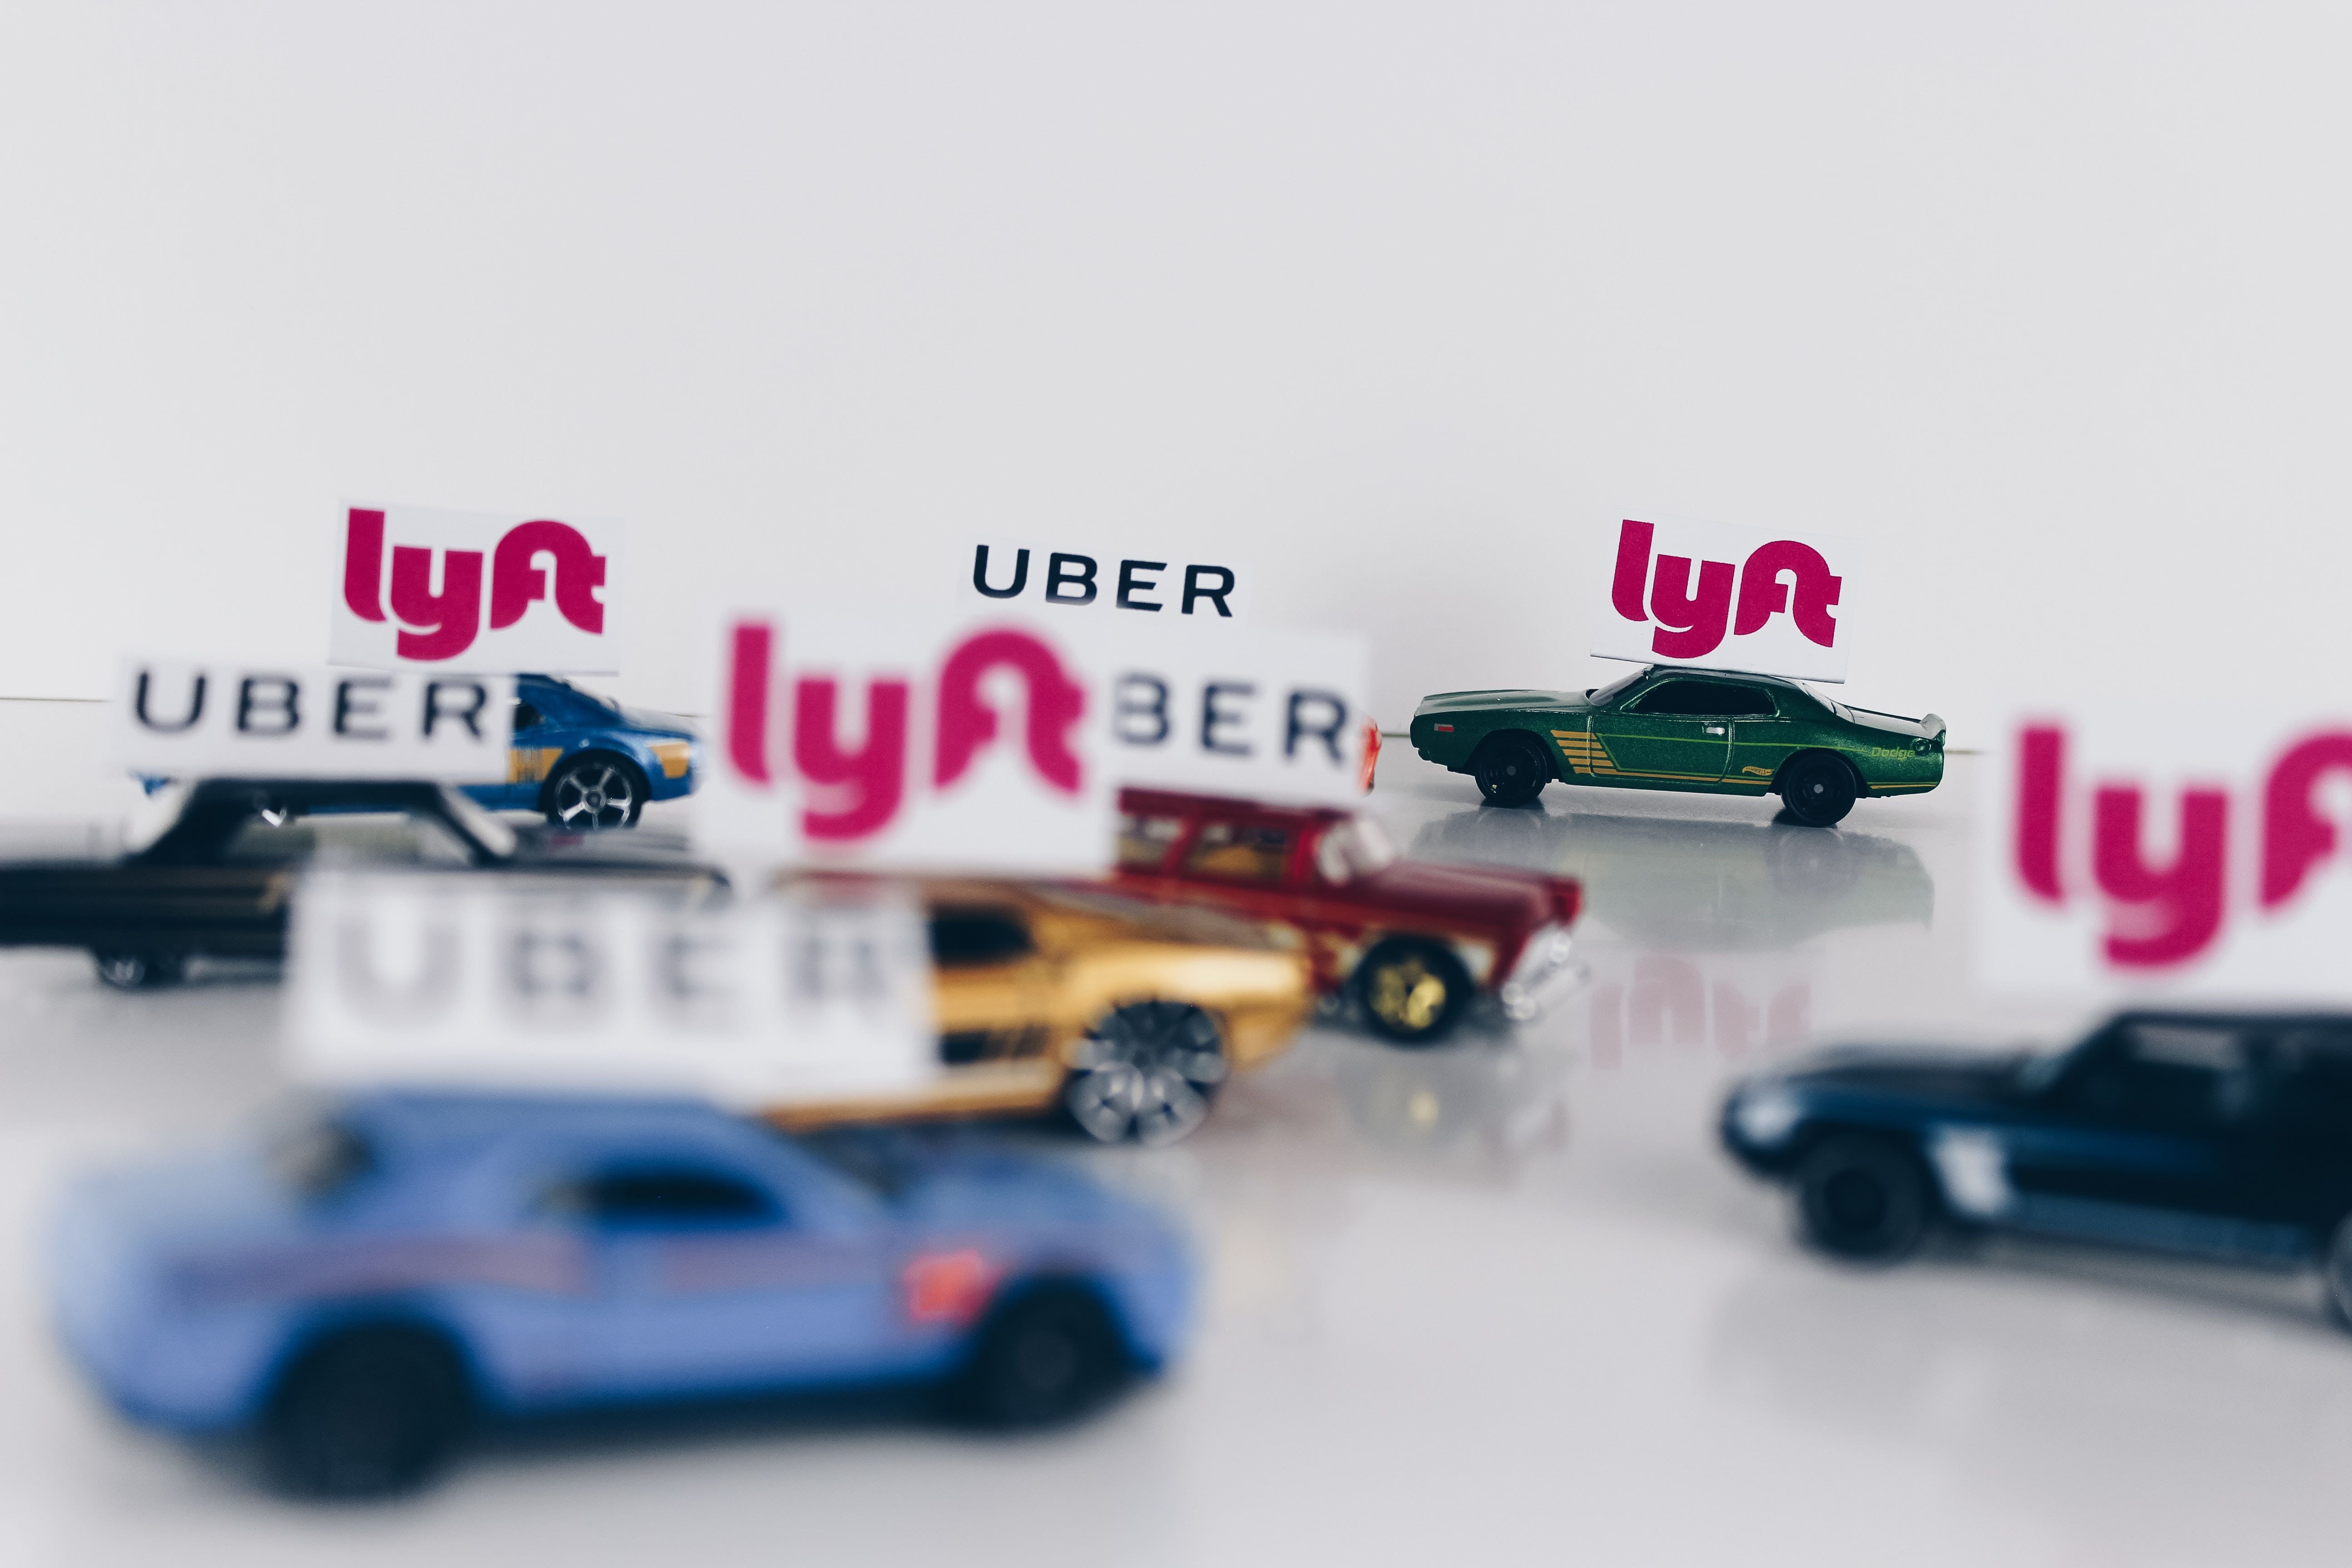 Should Lyft and DoorDash Merge To Better Compete With Uber? Analyst Pierre Ferragu Thinks So